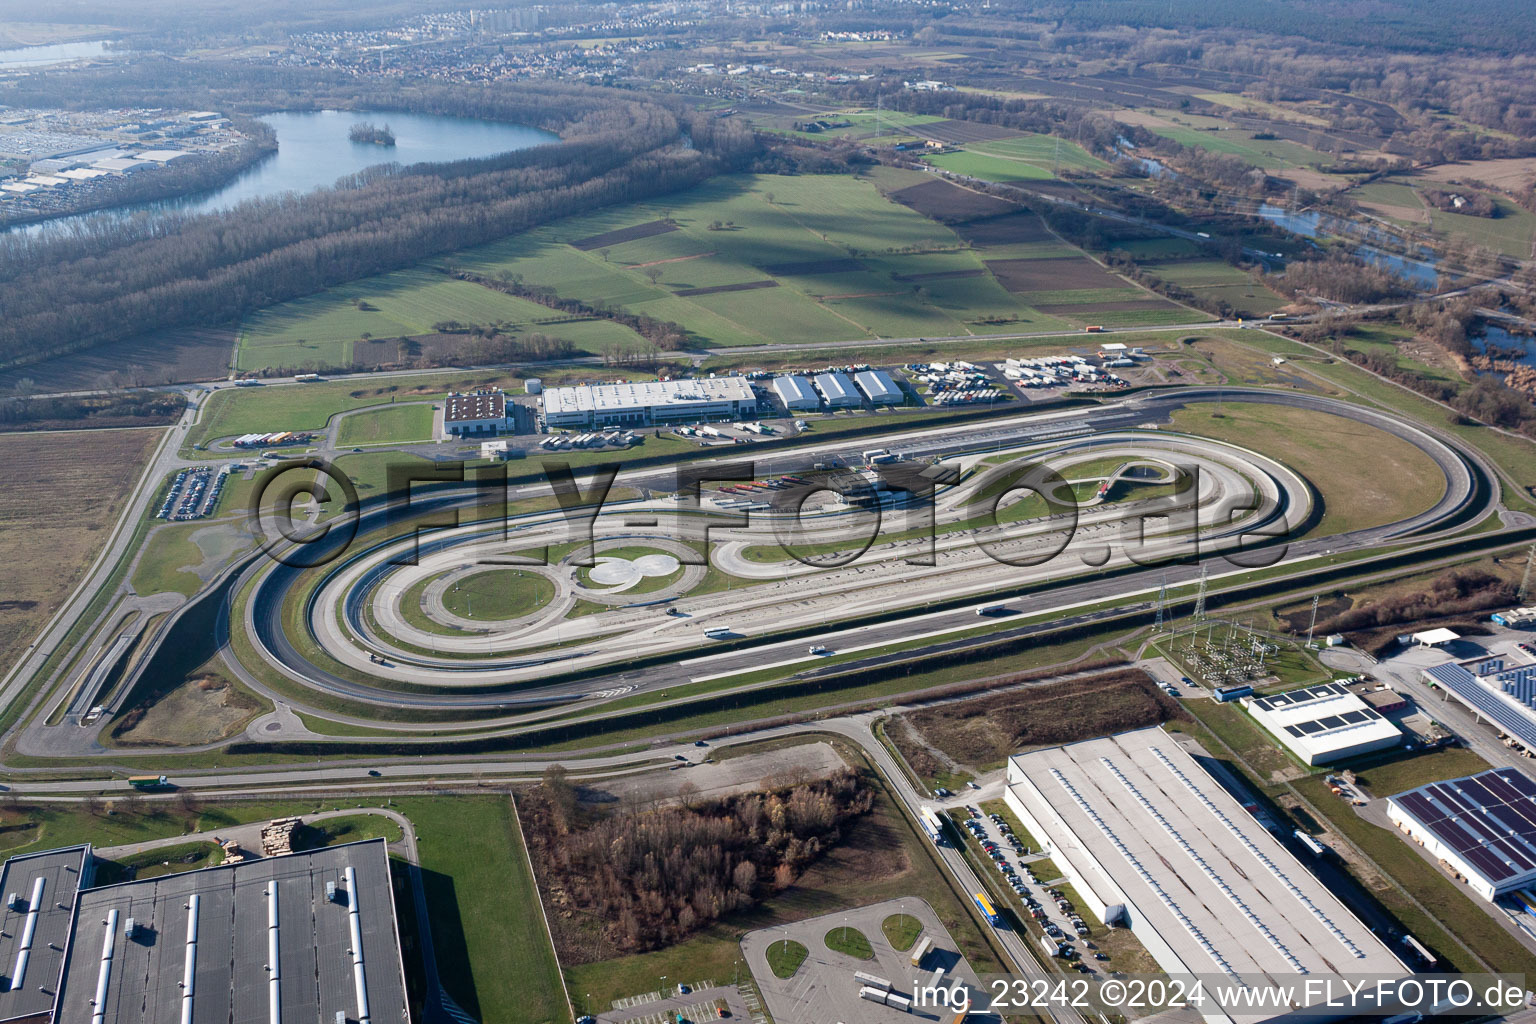 Test track and practice area for Trucks of Daimler in the district Industriegebiet Woerth-Oberwald in Woerth am Rhein in the state Rhineland-Palatinate